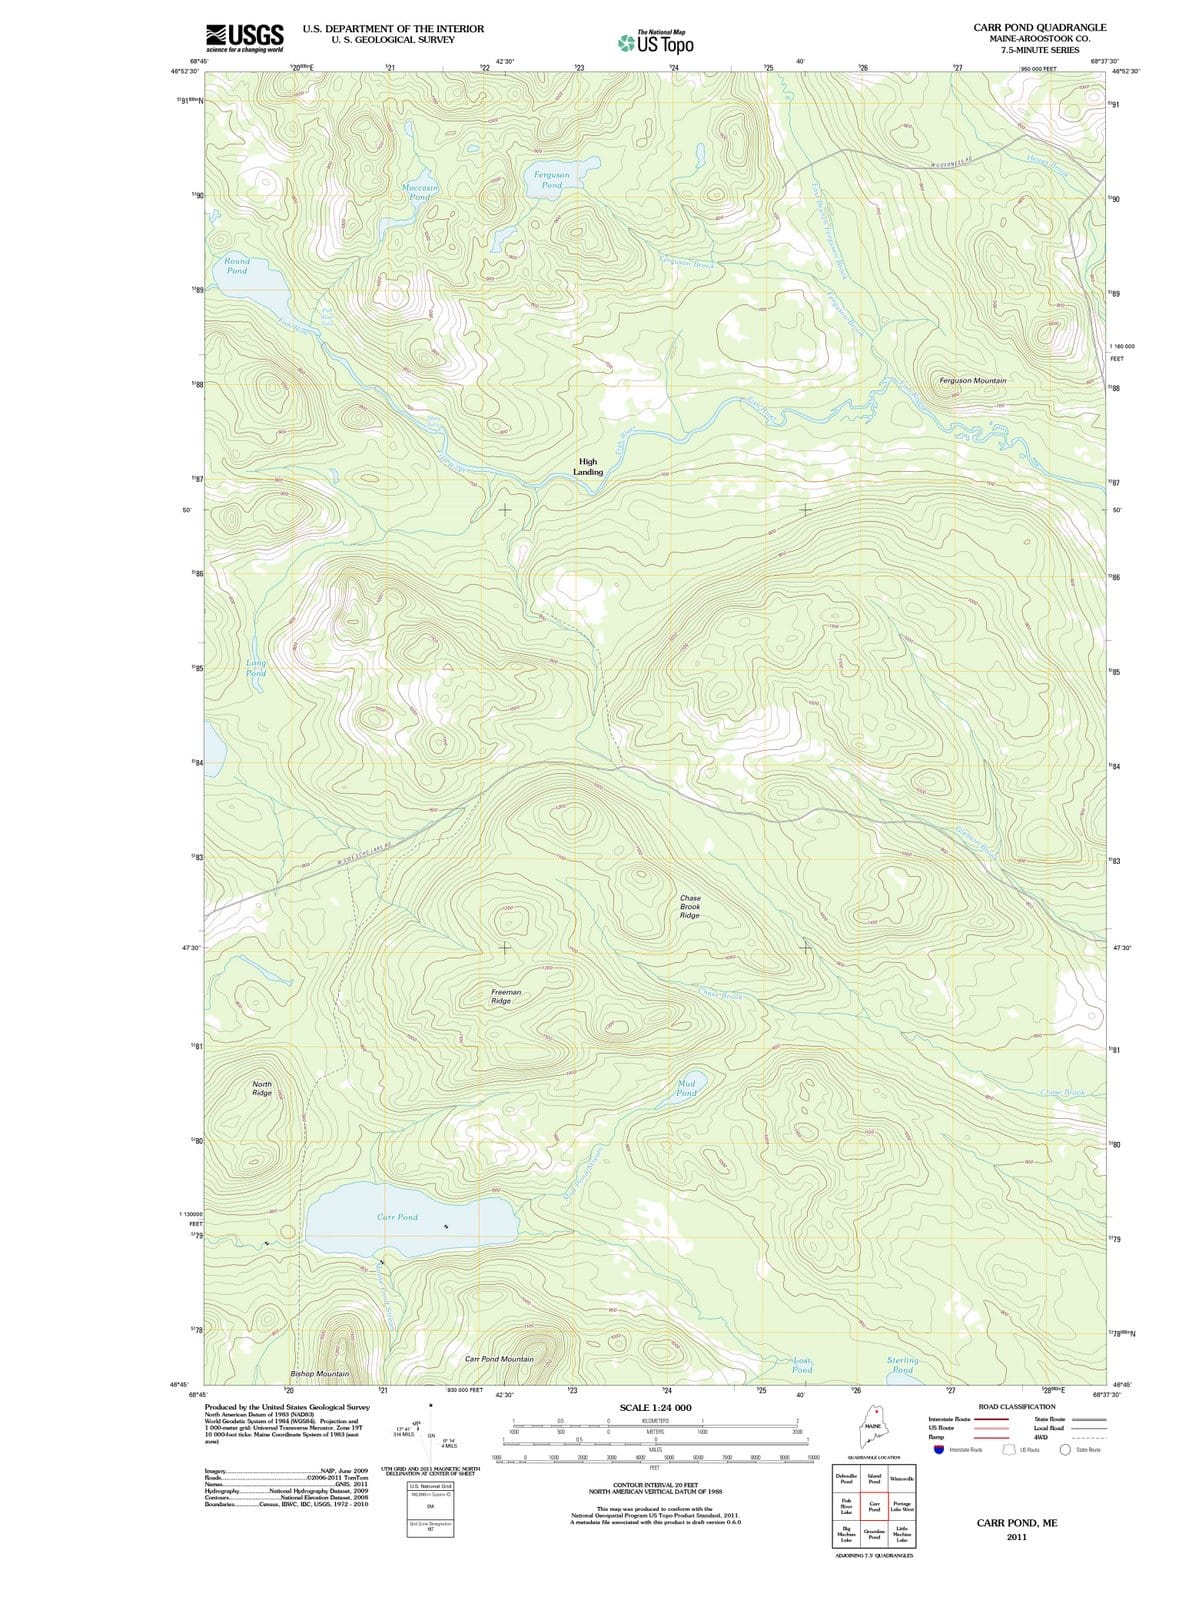 2011 Carr Pond, ME - Maine - USGS Topographic Map